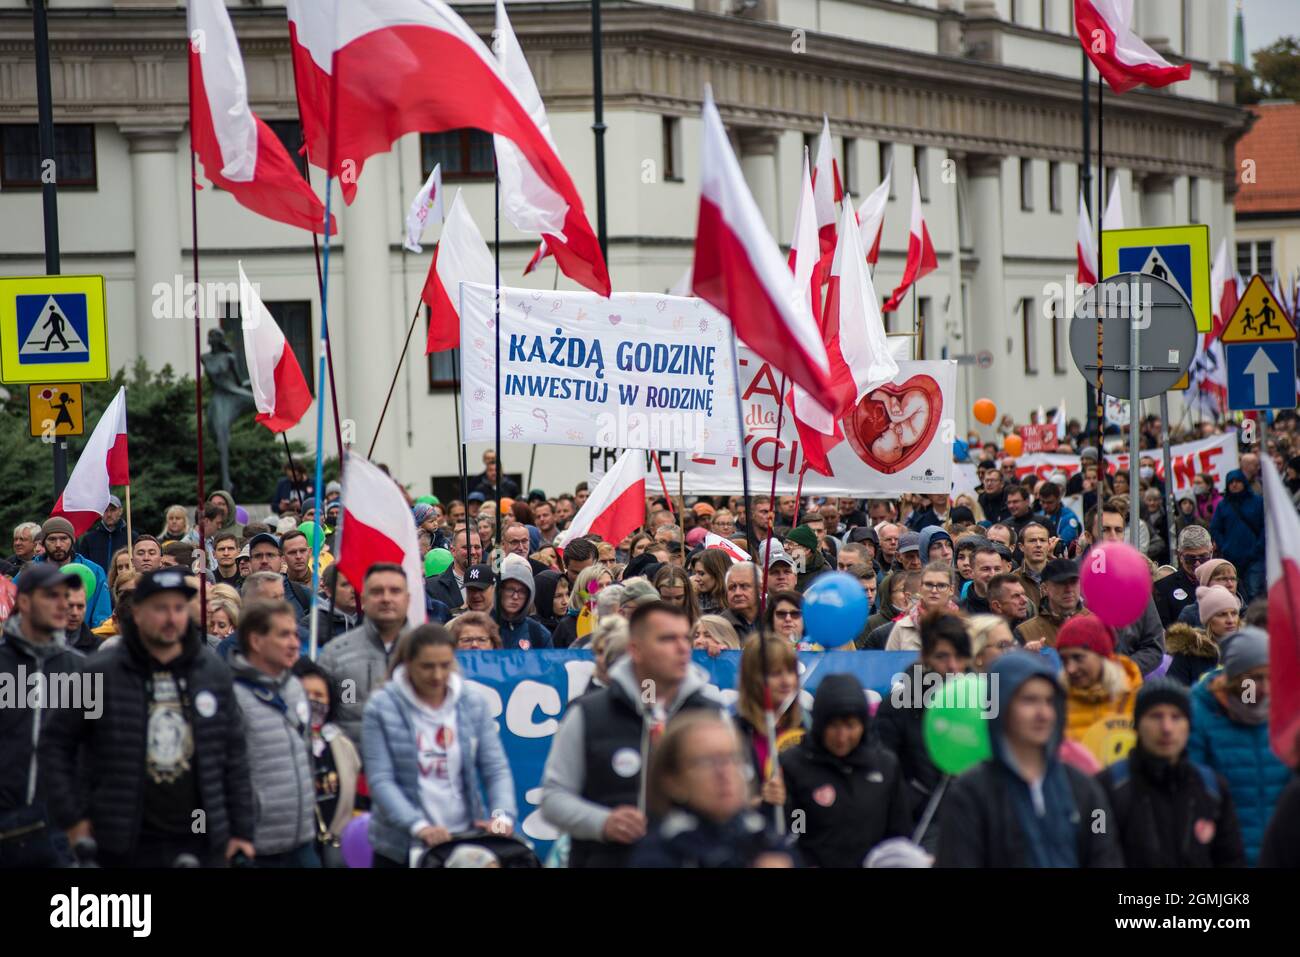 Warsaw, Poland. 19th Sep, 2021. Marchers wave flags during the demonstration.Thousands of people took part in the XVI National March of Life and Family (Narodowy Marsz Zycia i Rodziny) in Warsaw which was held under the slogan 'Dad - be, lead, protect'. As the organizers of the event announced earlier, it was aimed at manifesting pro-family attitudes and pro-life values. The event's main organizer was the Center of Life and Family. (Photo by Attila Husejnow/SOPA Images/Sipa USA) Credit: Sipa USA/Alamy Live News Stock Photo